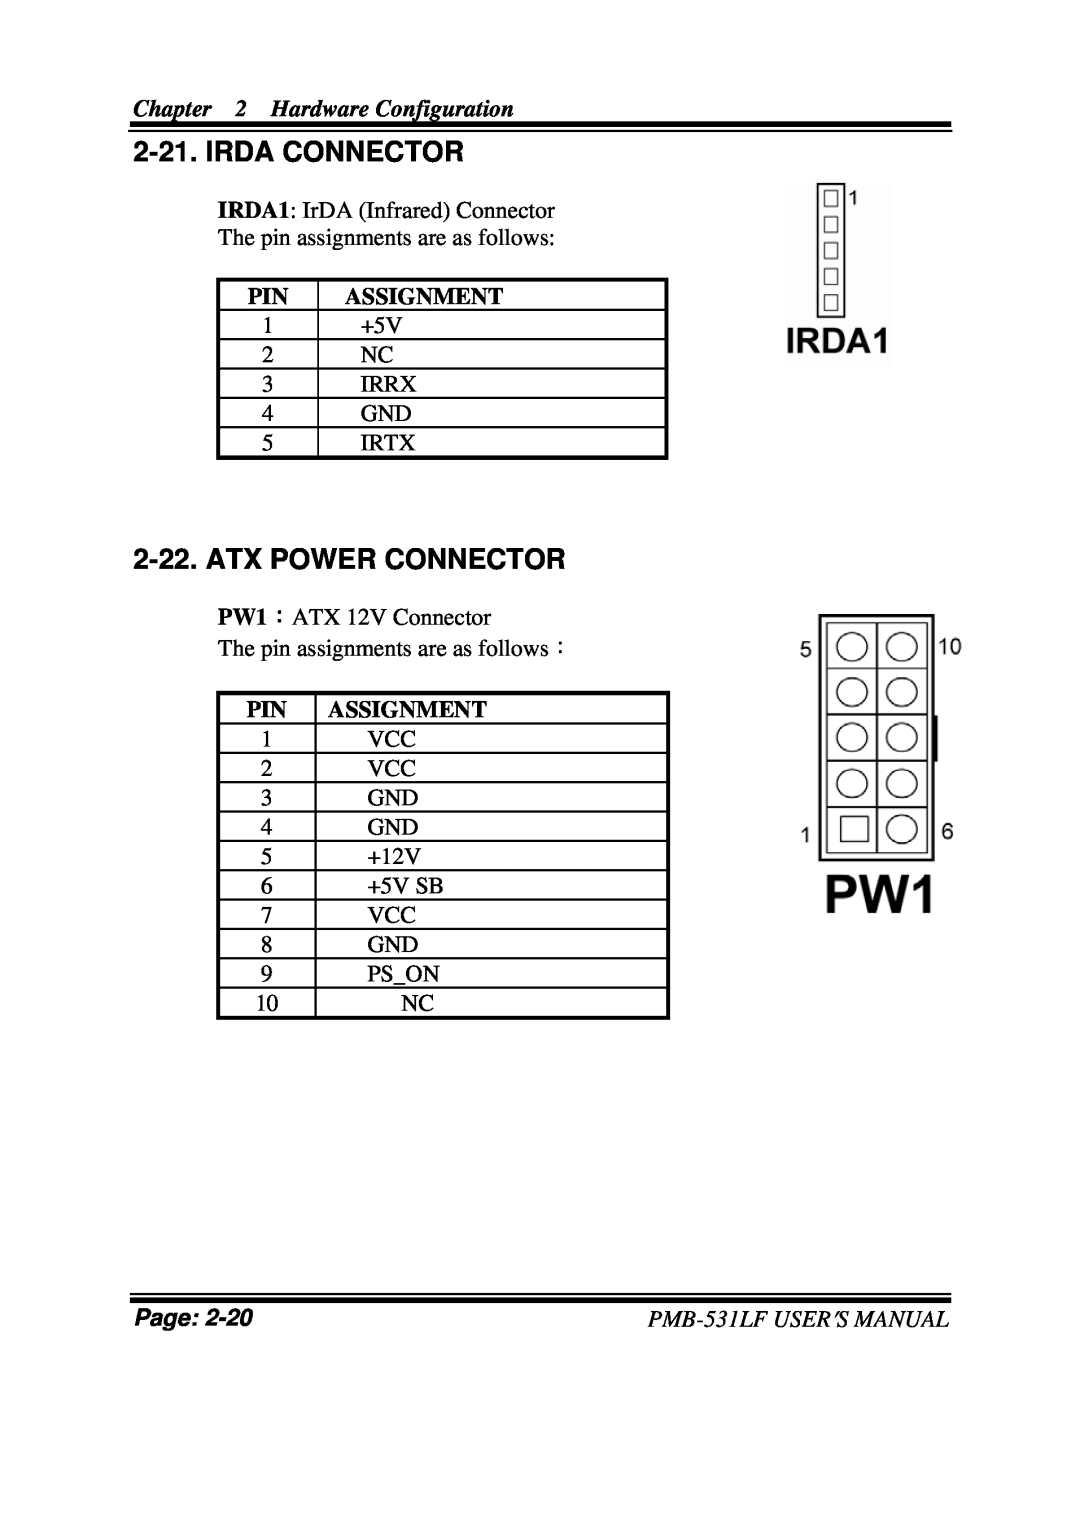 Intel user manual Irda Connector, Atx Power Connector, Hardware Configuration, Assignment, Page, PMB-531LFUSER′S MANUAL 